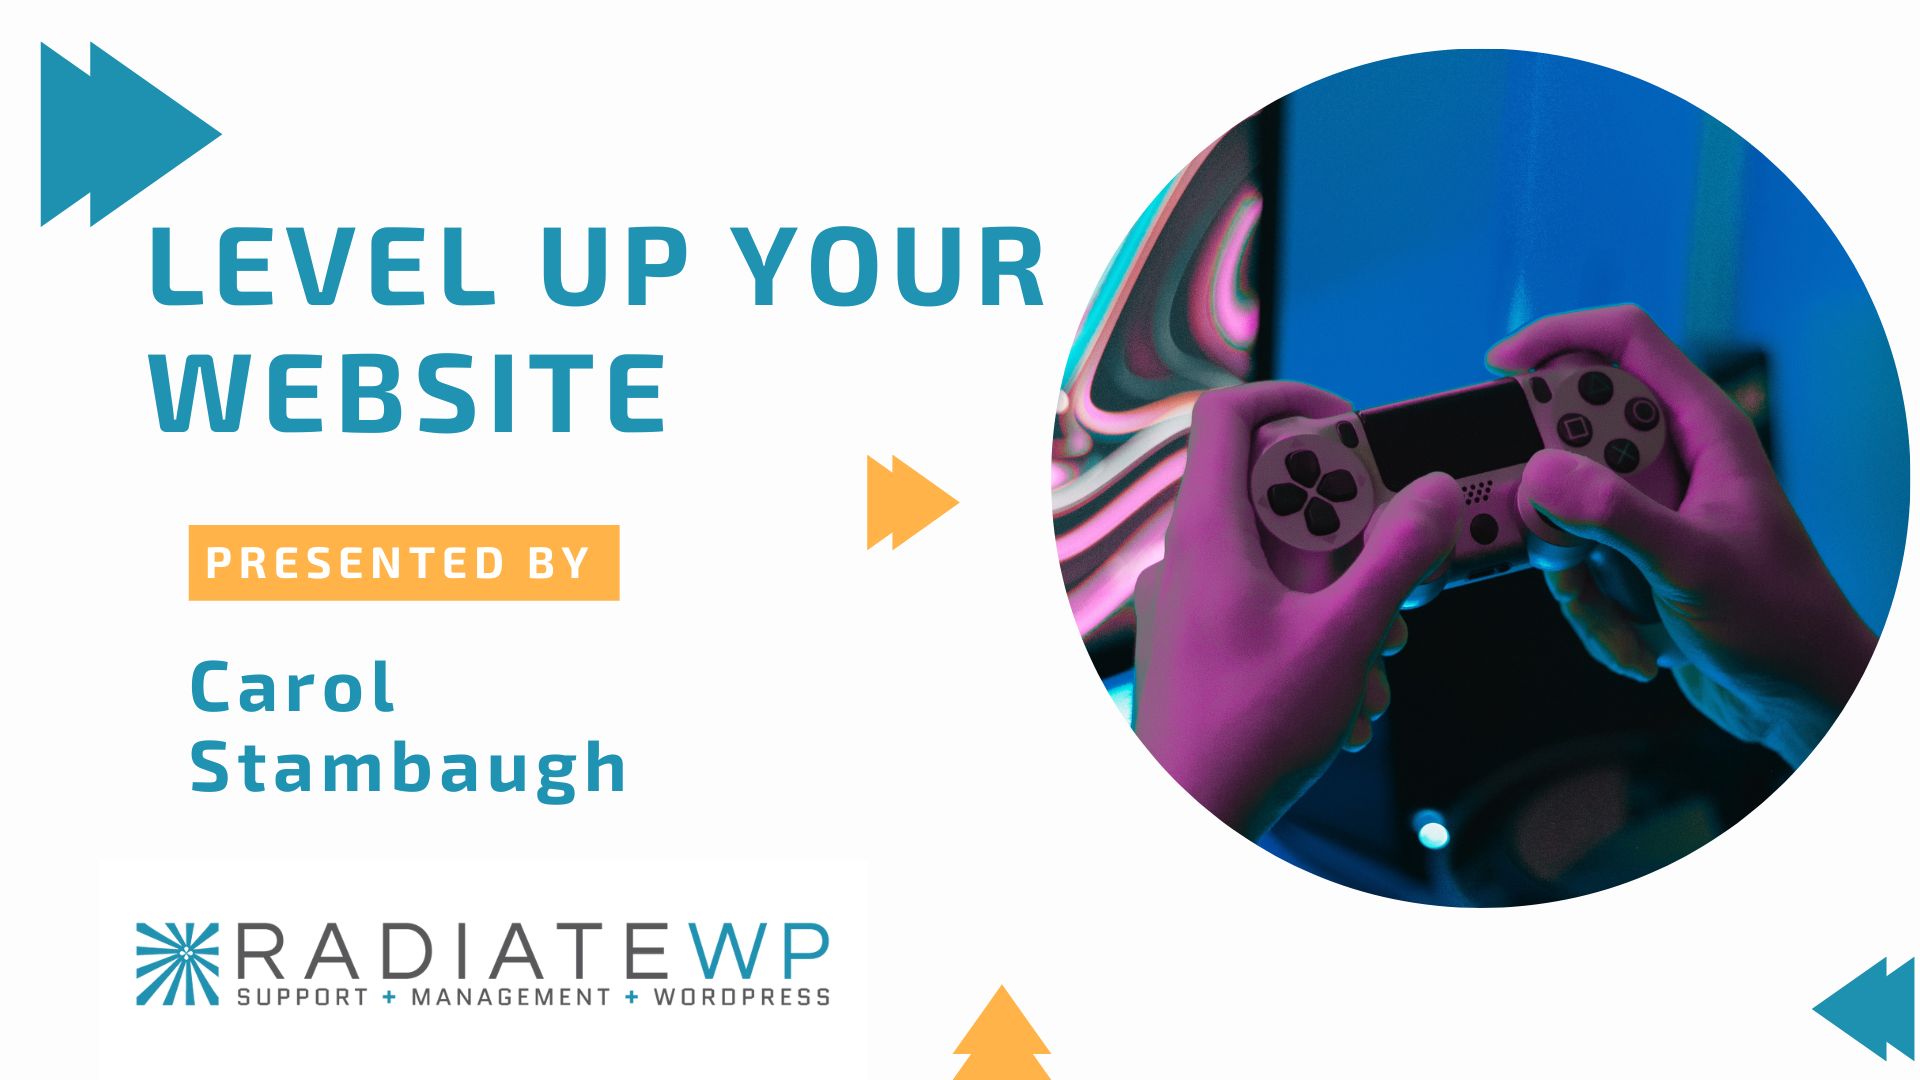 Title slide for presentation that says, "Level Up Your Website Presented by Carol Stambaugh"